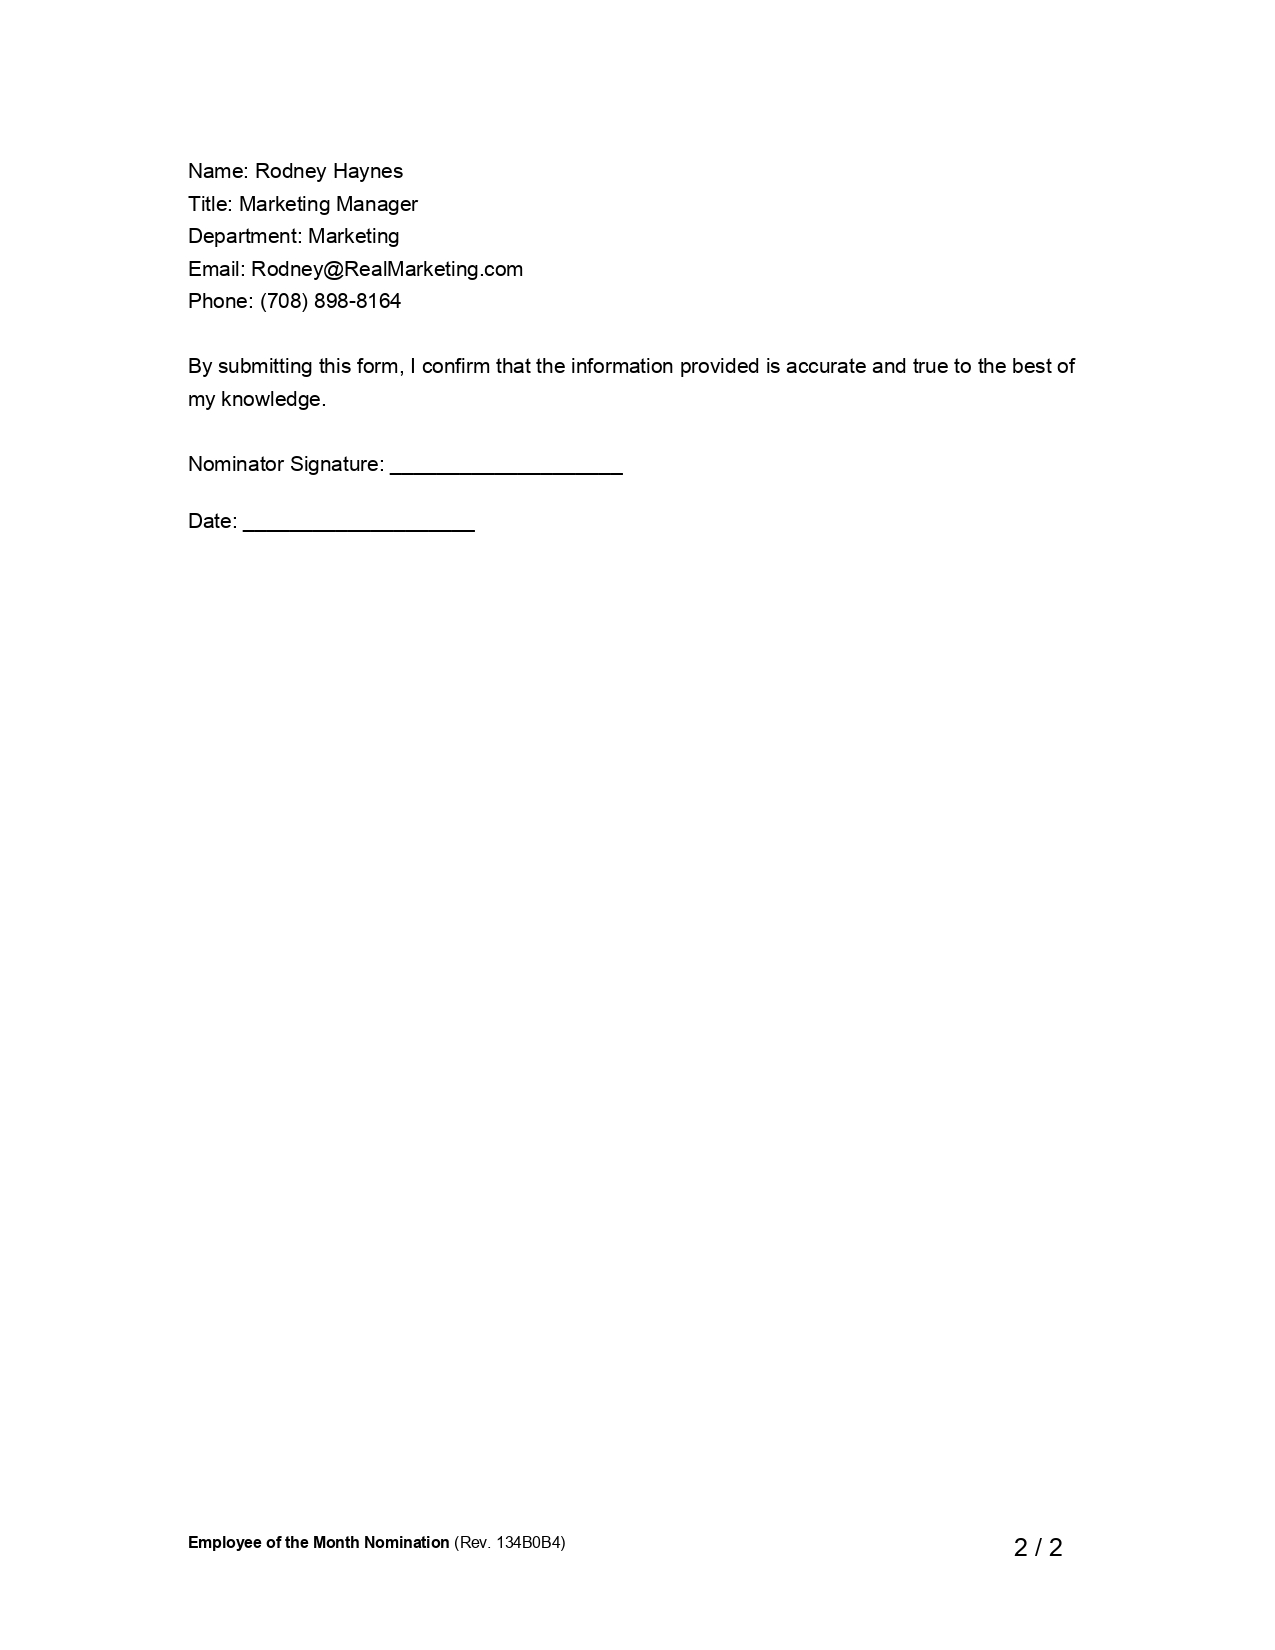 Employee of the month nomination form example